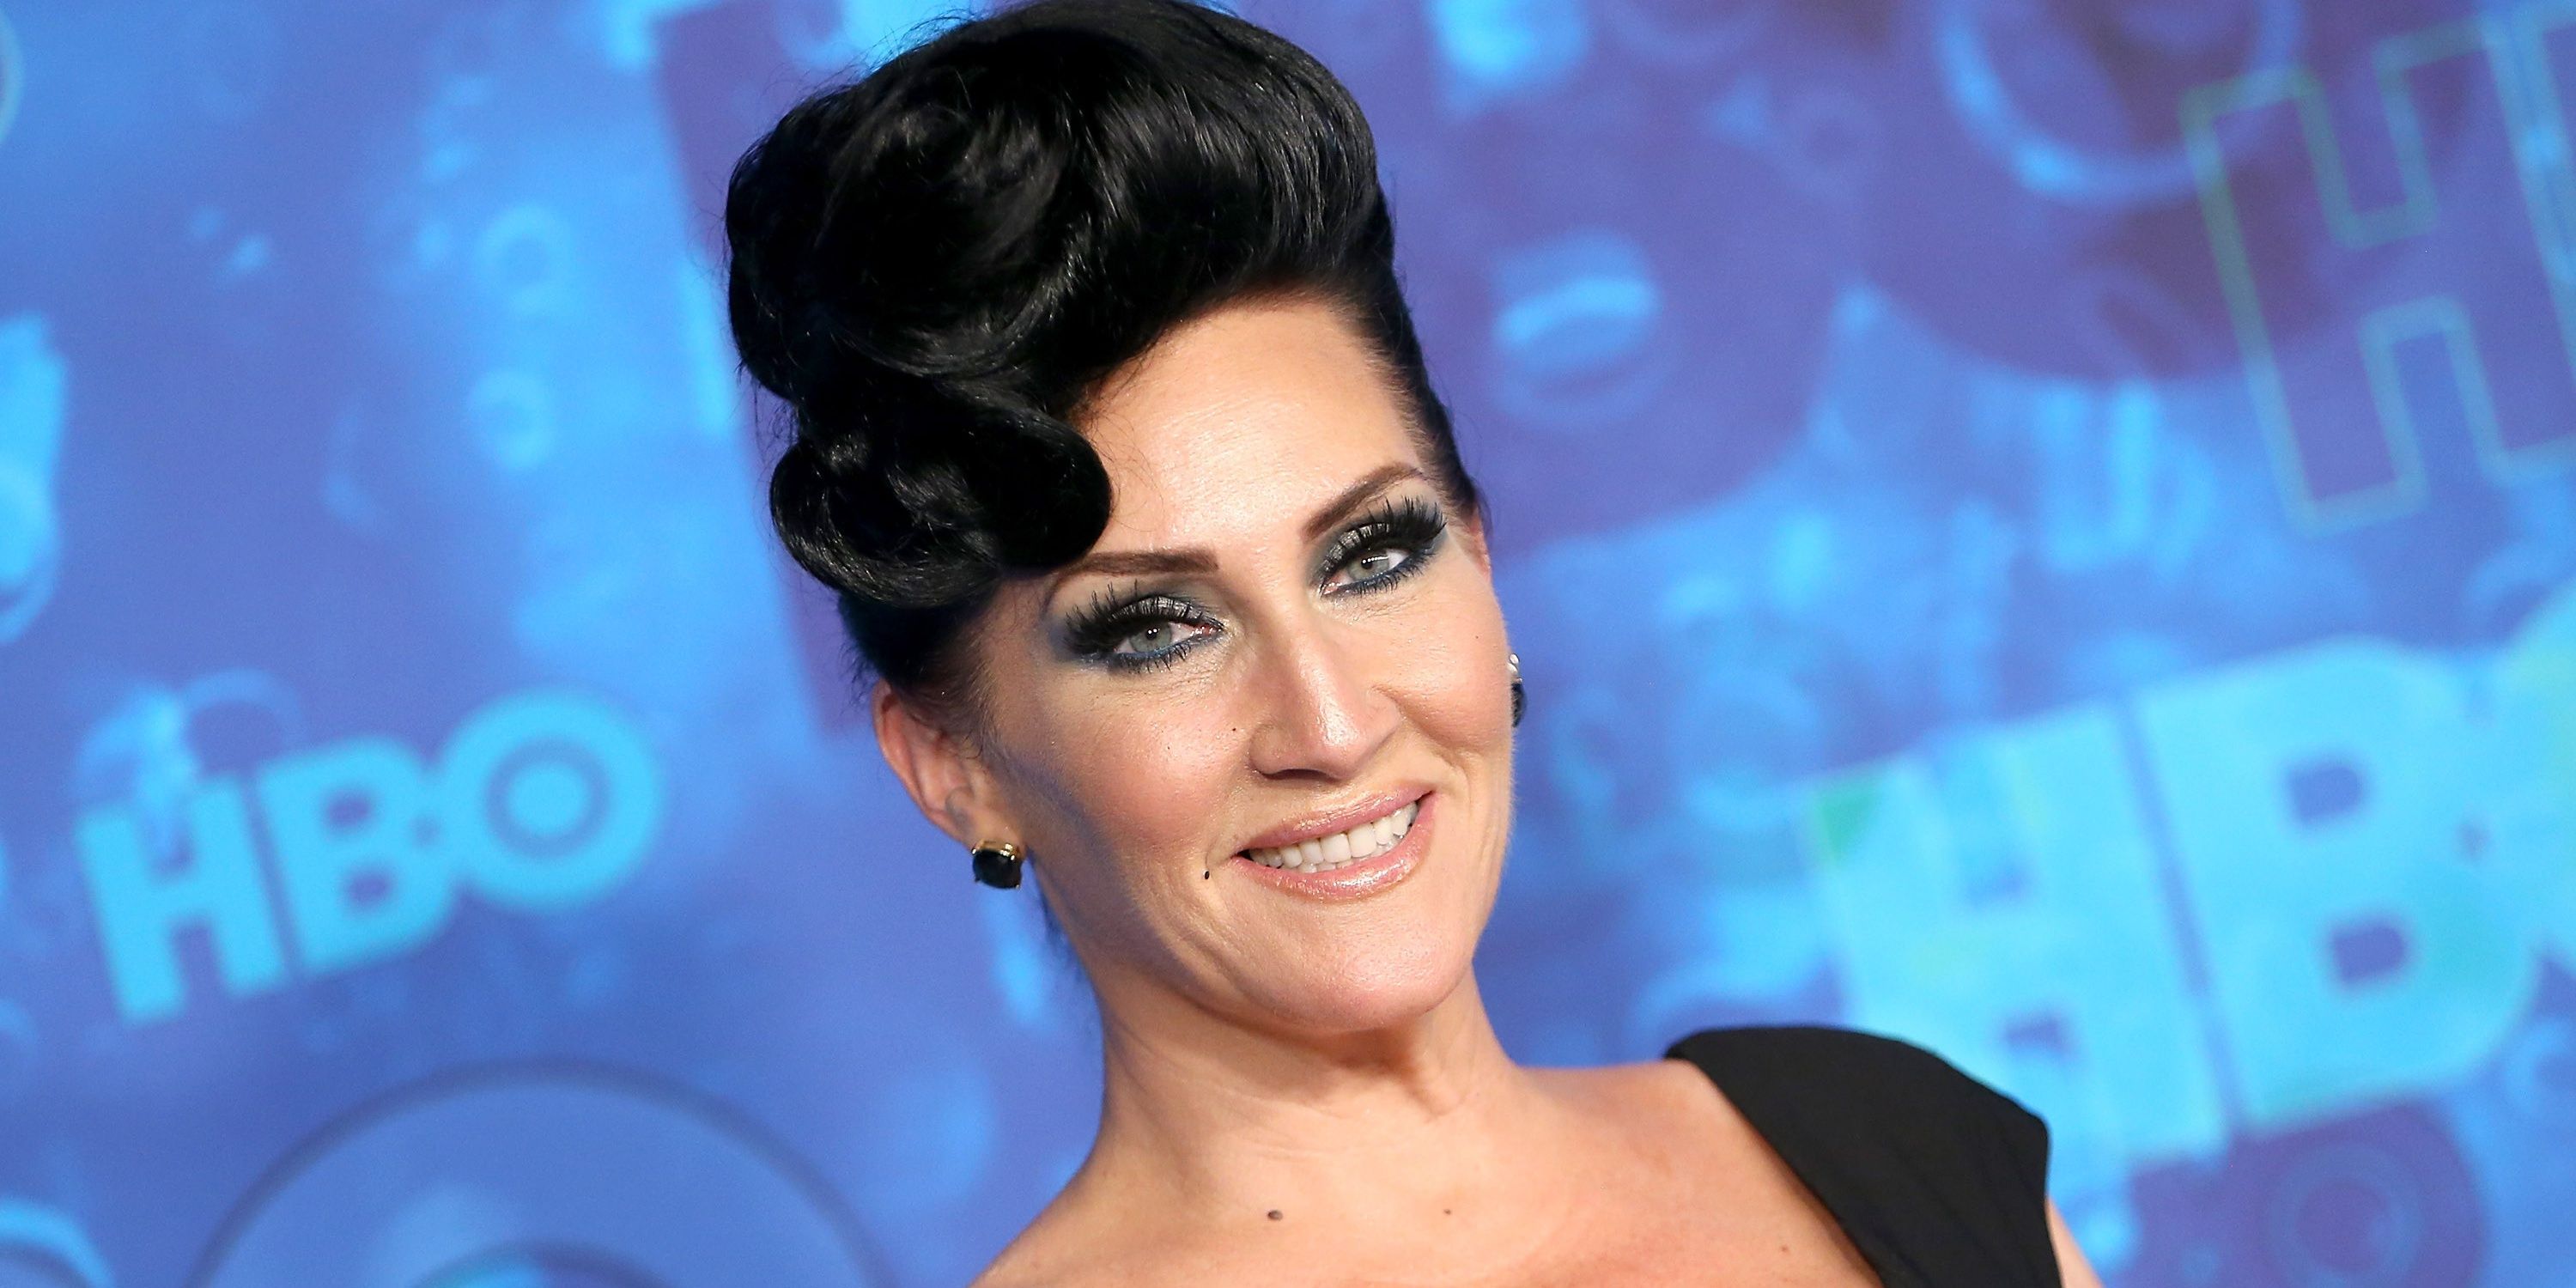 Michelle Visage on HBO event